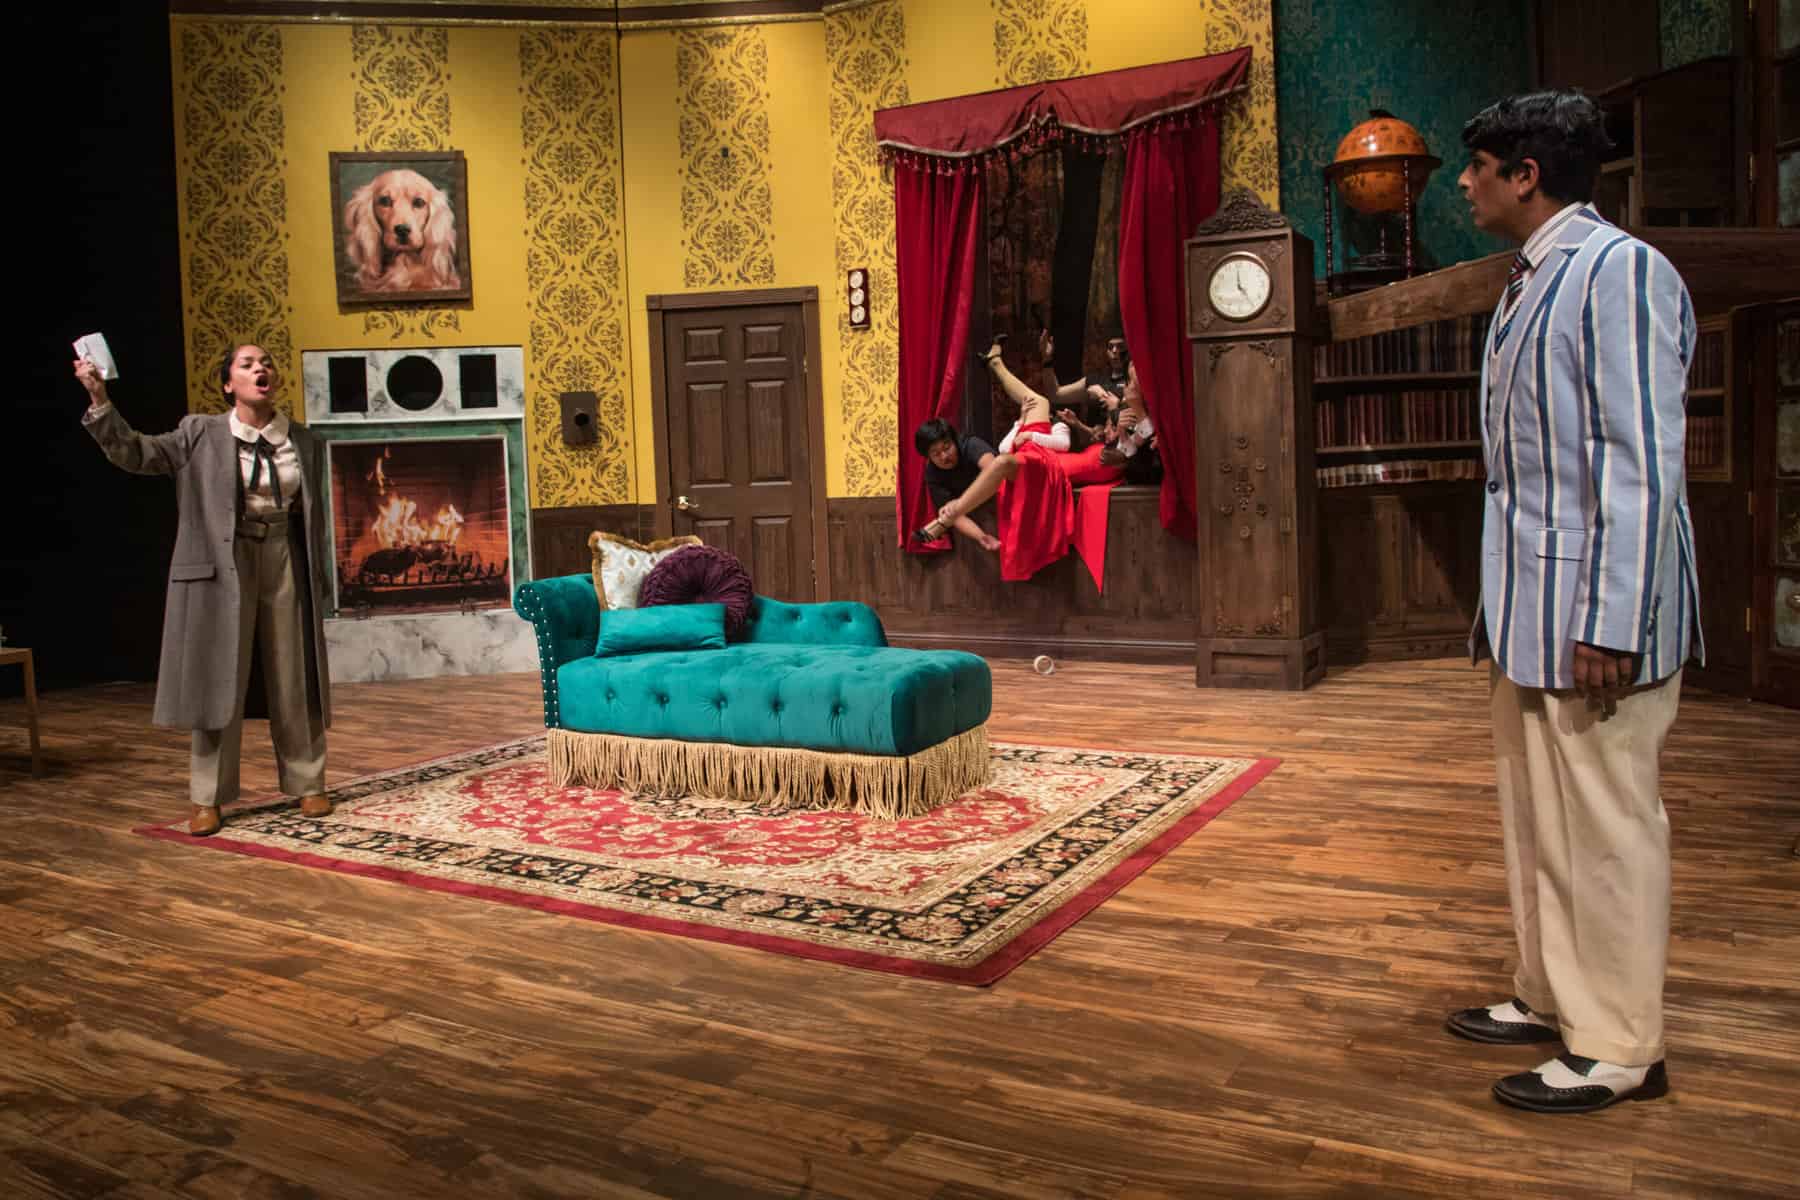 Production photo from "The Play That Goes Wrong" at Valley Christian Schools: a dramatic moment with characters staring each other down while a woman is pulled tumbling through a window